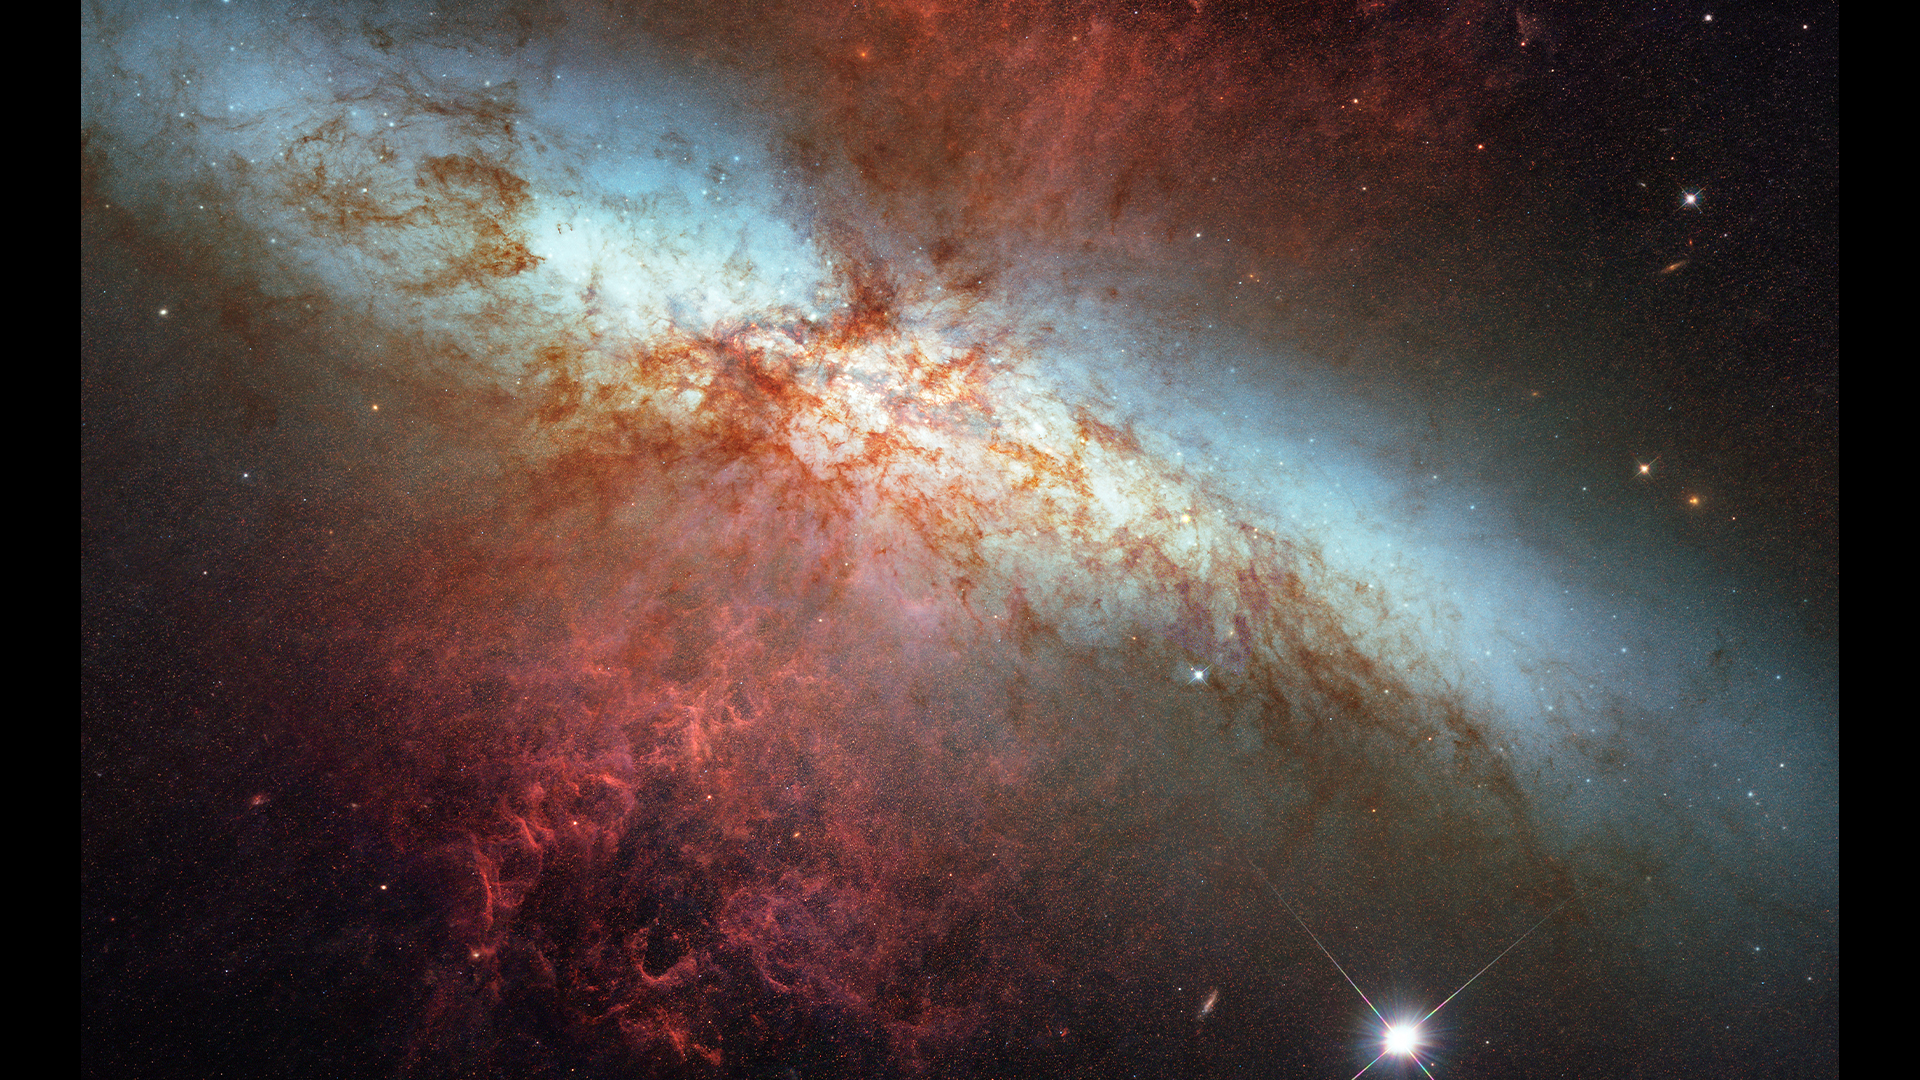 A Type Ia supernova seen in the galaxy M82 by the Hubble Space Telescope.